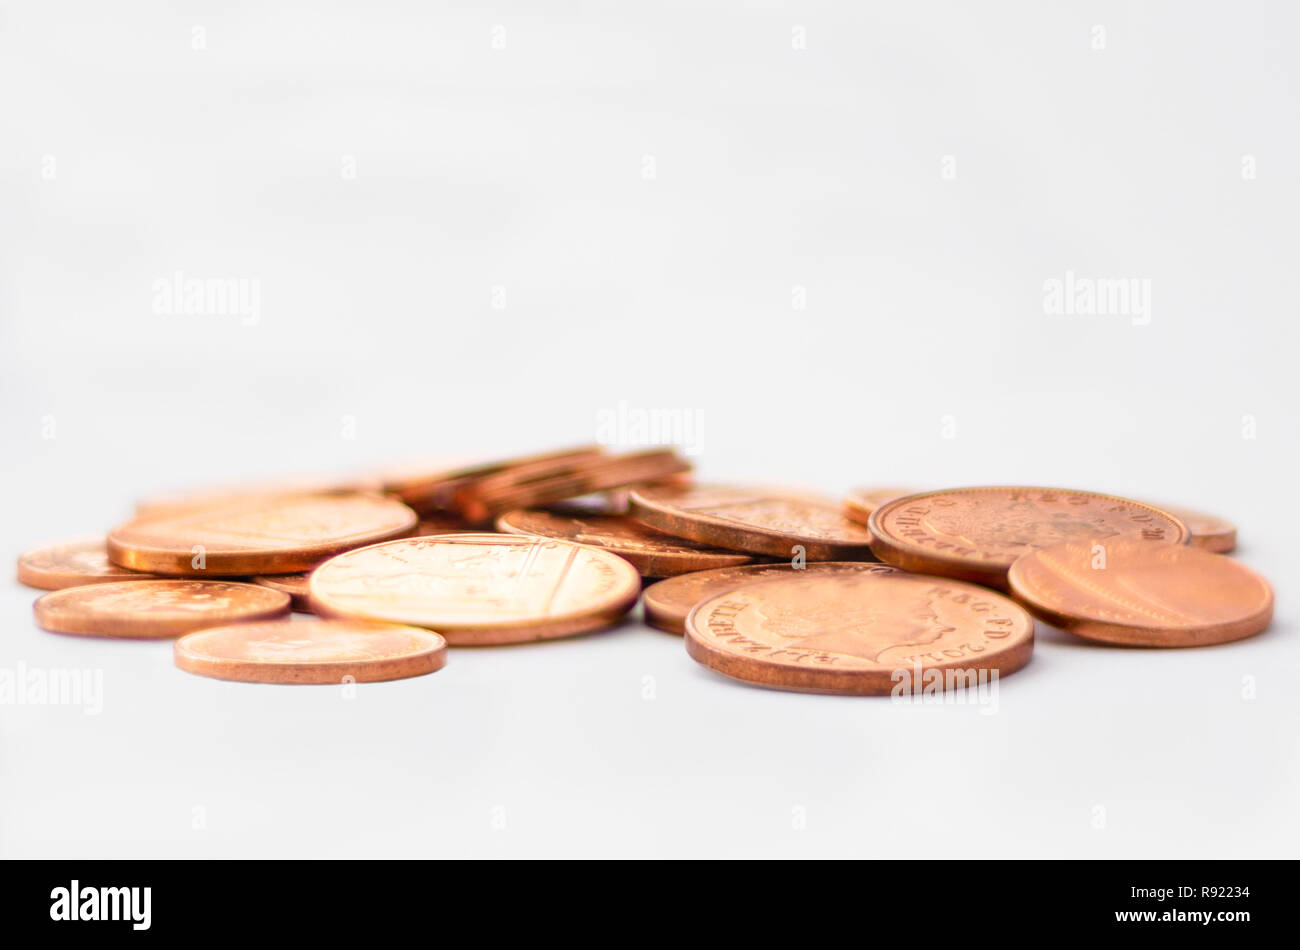 Handful of GBP British Currency Penny Coins Laid Out on top of White Background with empty space Stock Photo